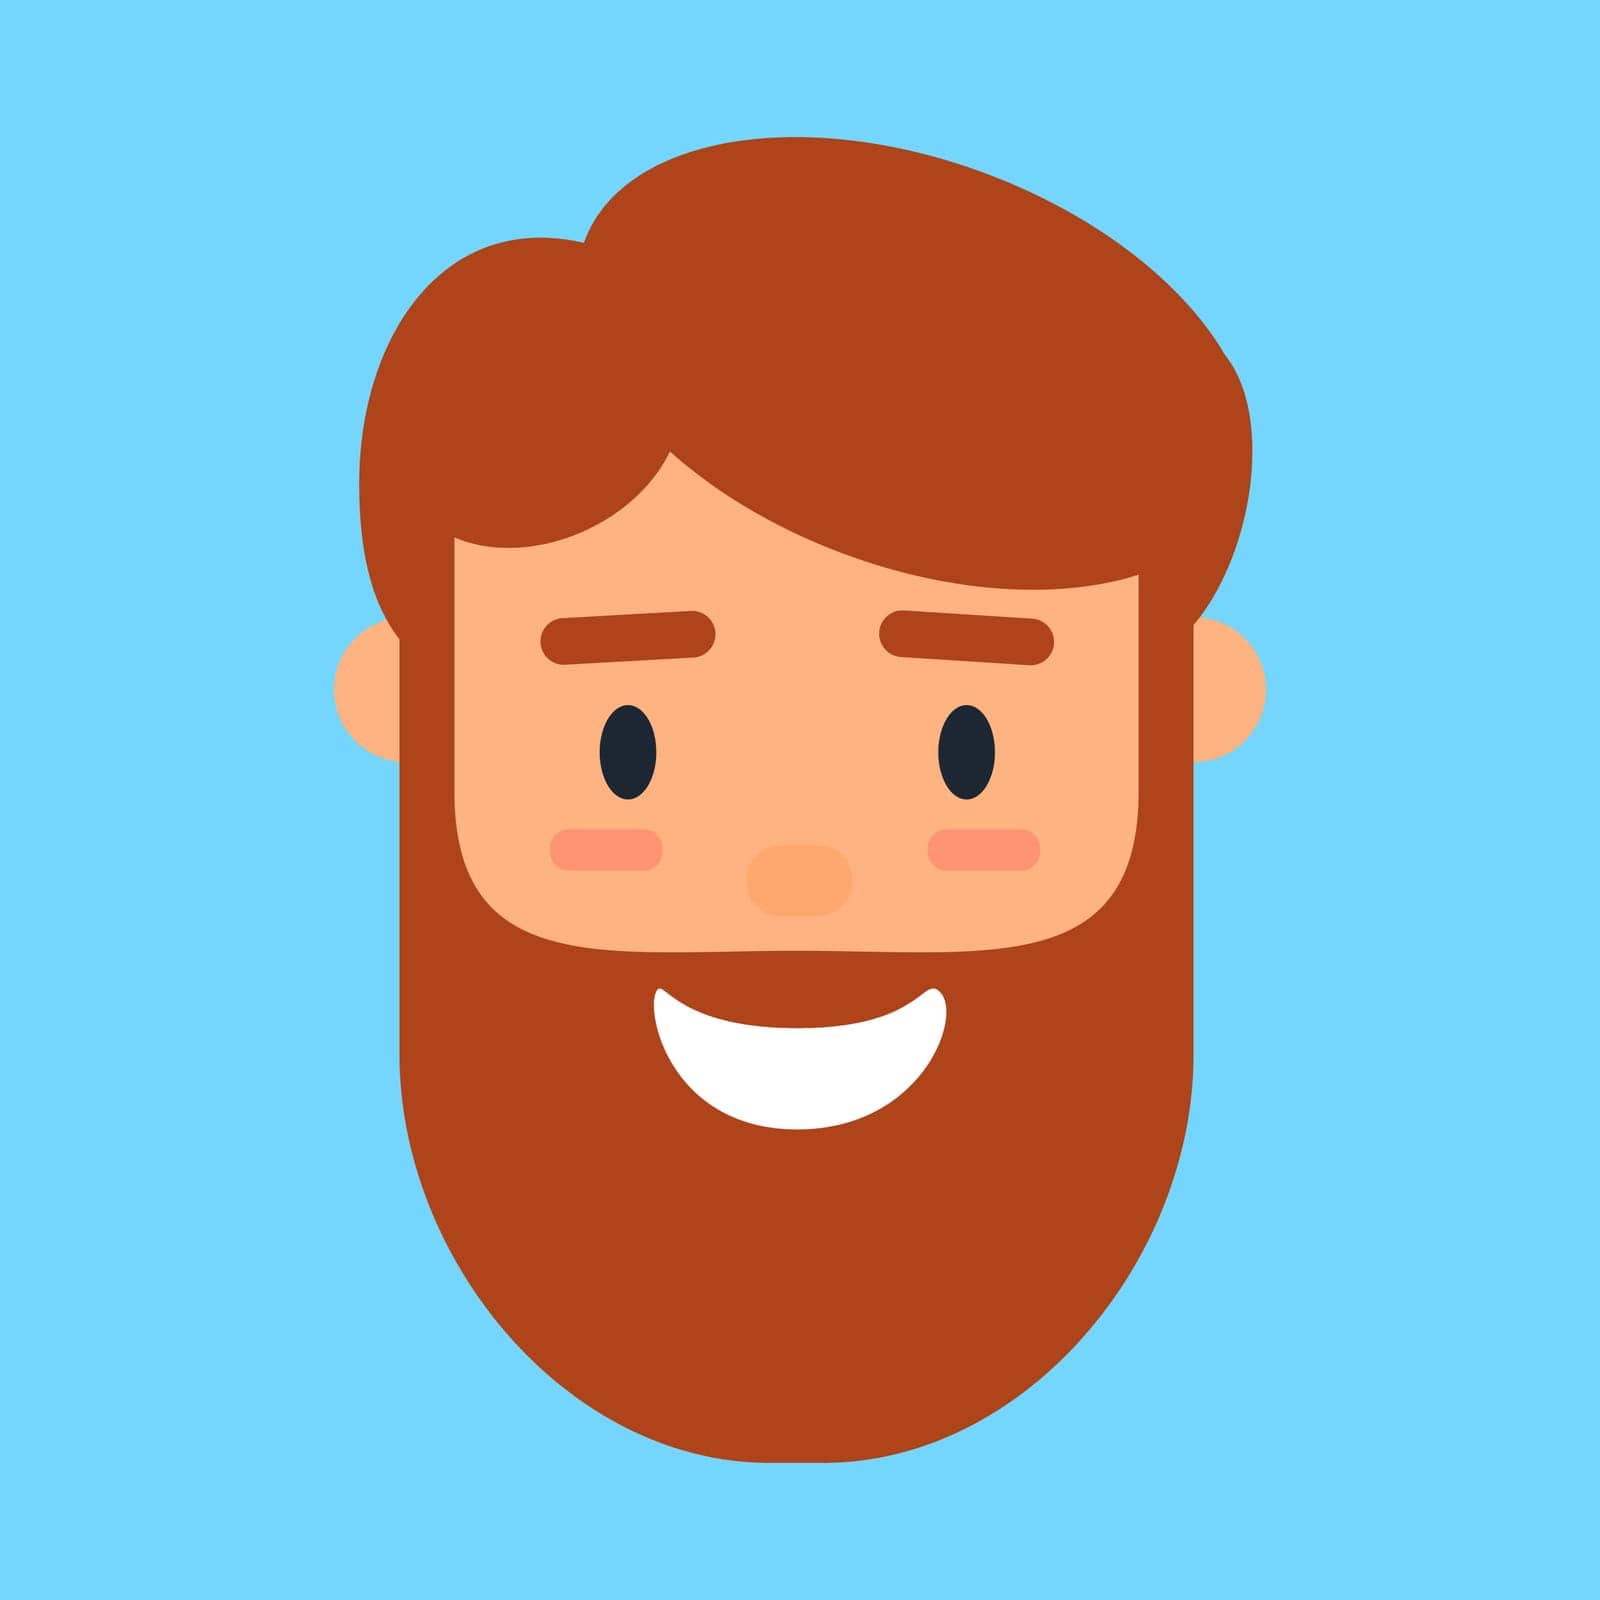 Cartoon avatar of smiling bearded man, profile icon for hipster business employee or social network user. Male character portrait. Vector illustration